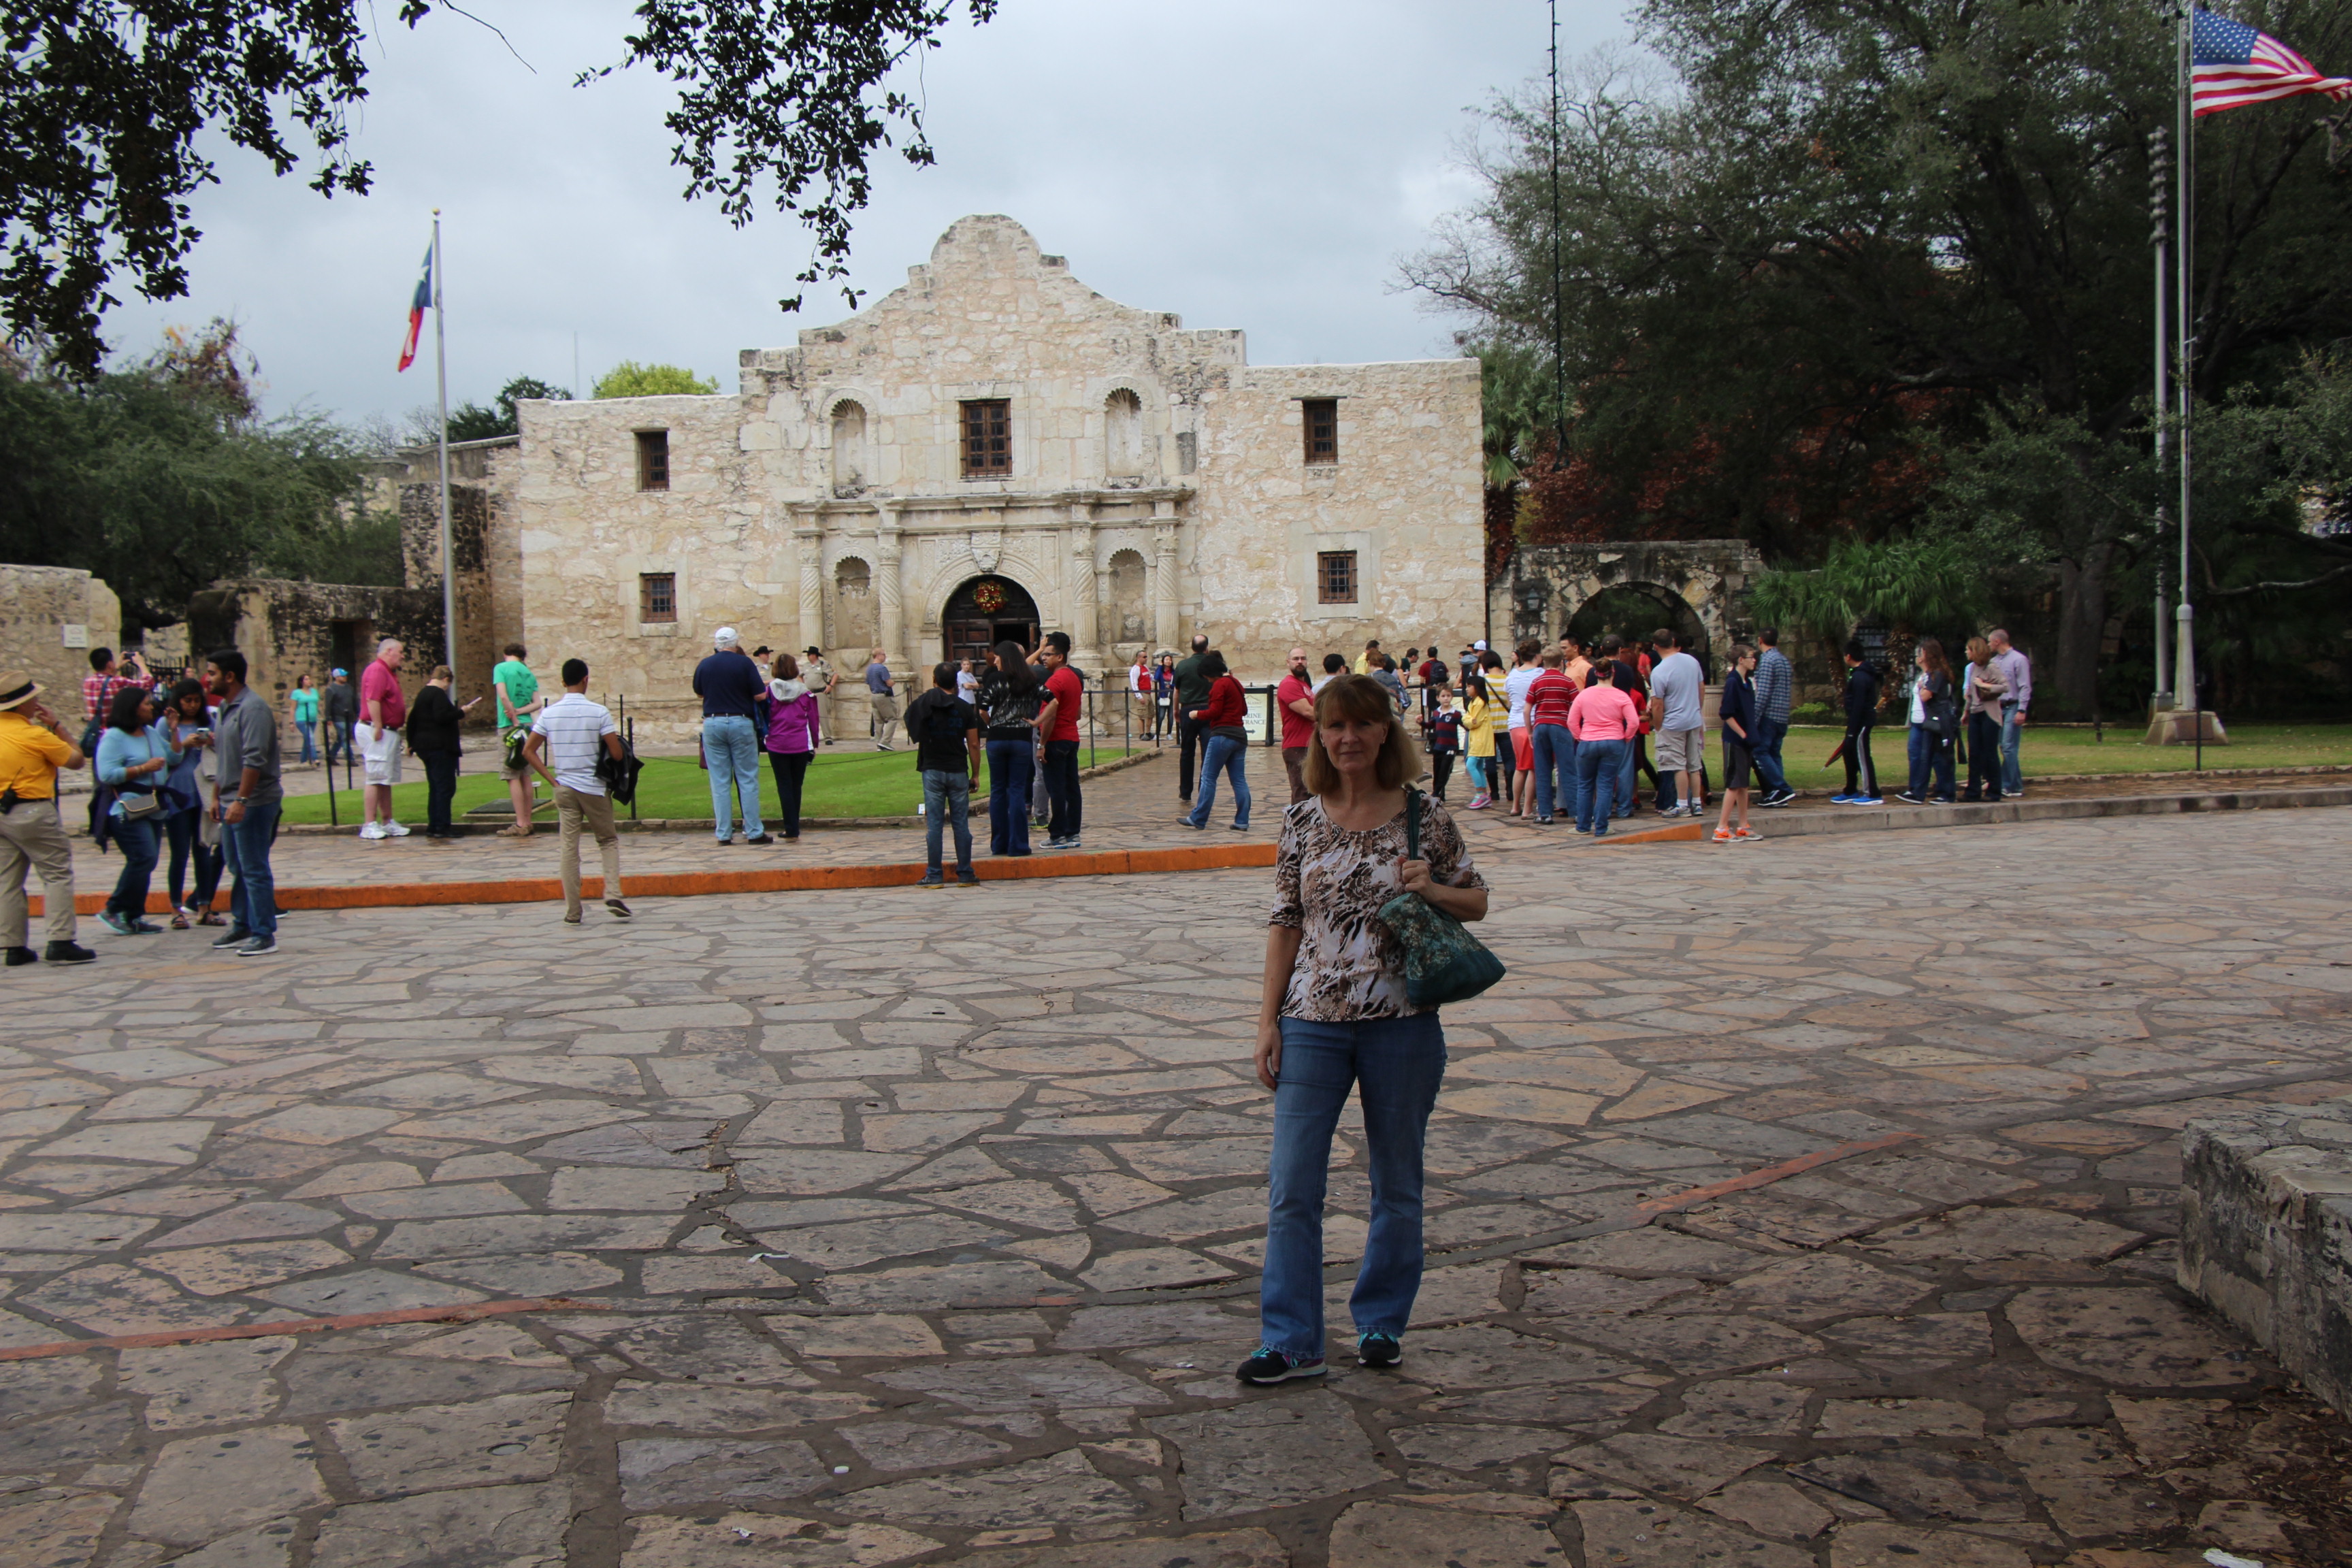 A woman stands near the Alamo in Texas